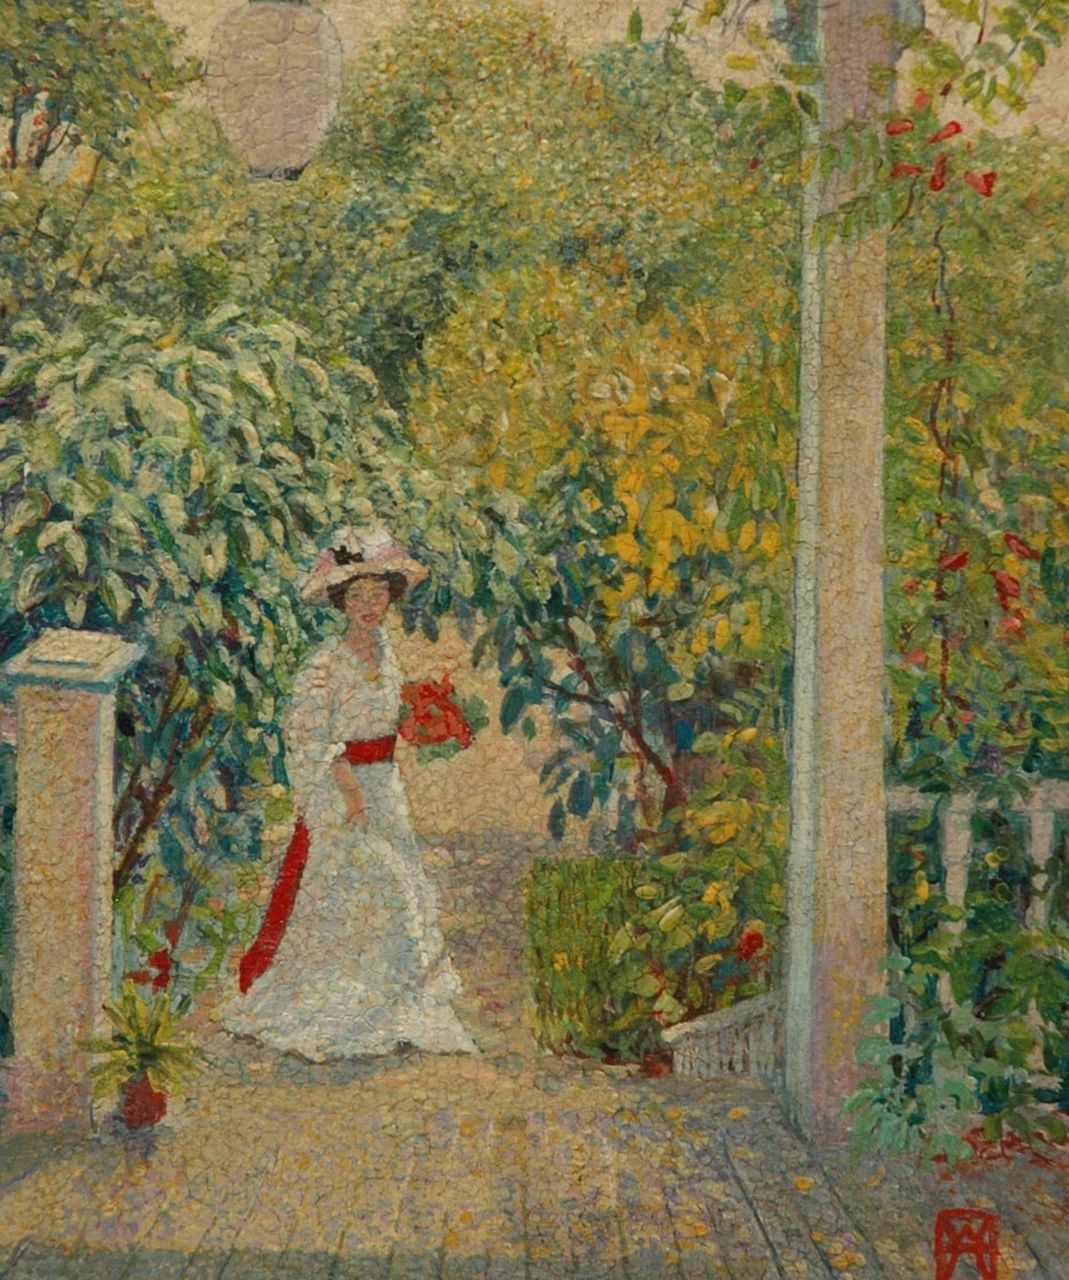 Wally Ames | Woman in white dress in a garden, Öl auf Holzfaser, 22,4 x 18,6 cm, signed l.r. with monogram